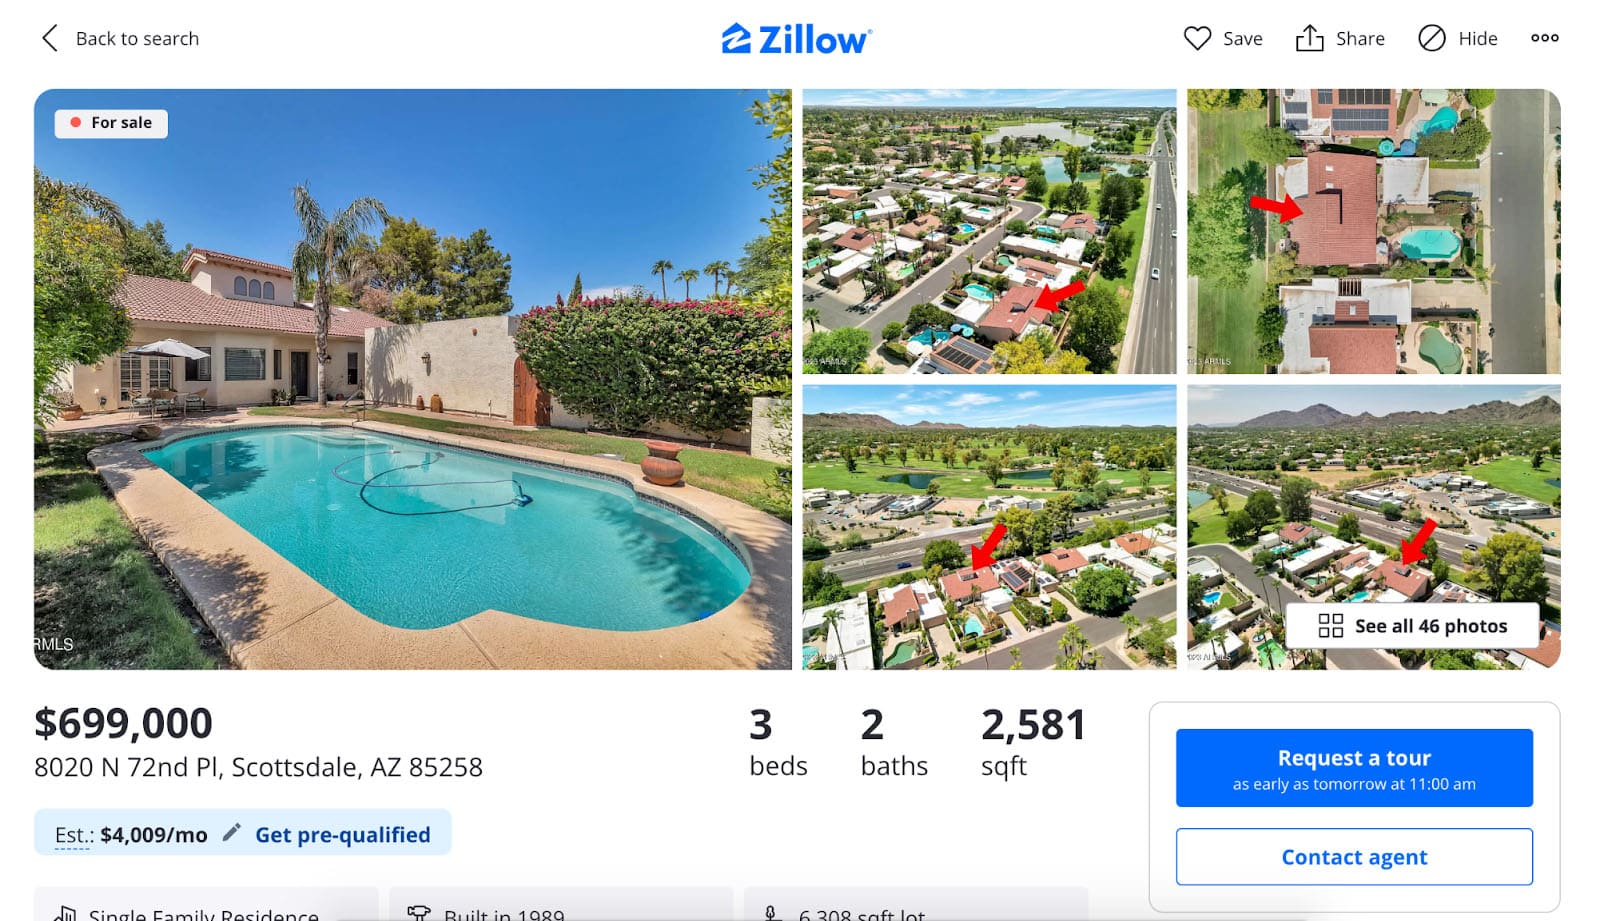 Screenshot of rental property in ideal warm location with pool.